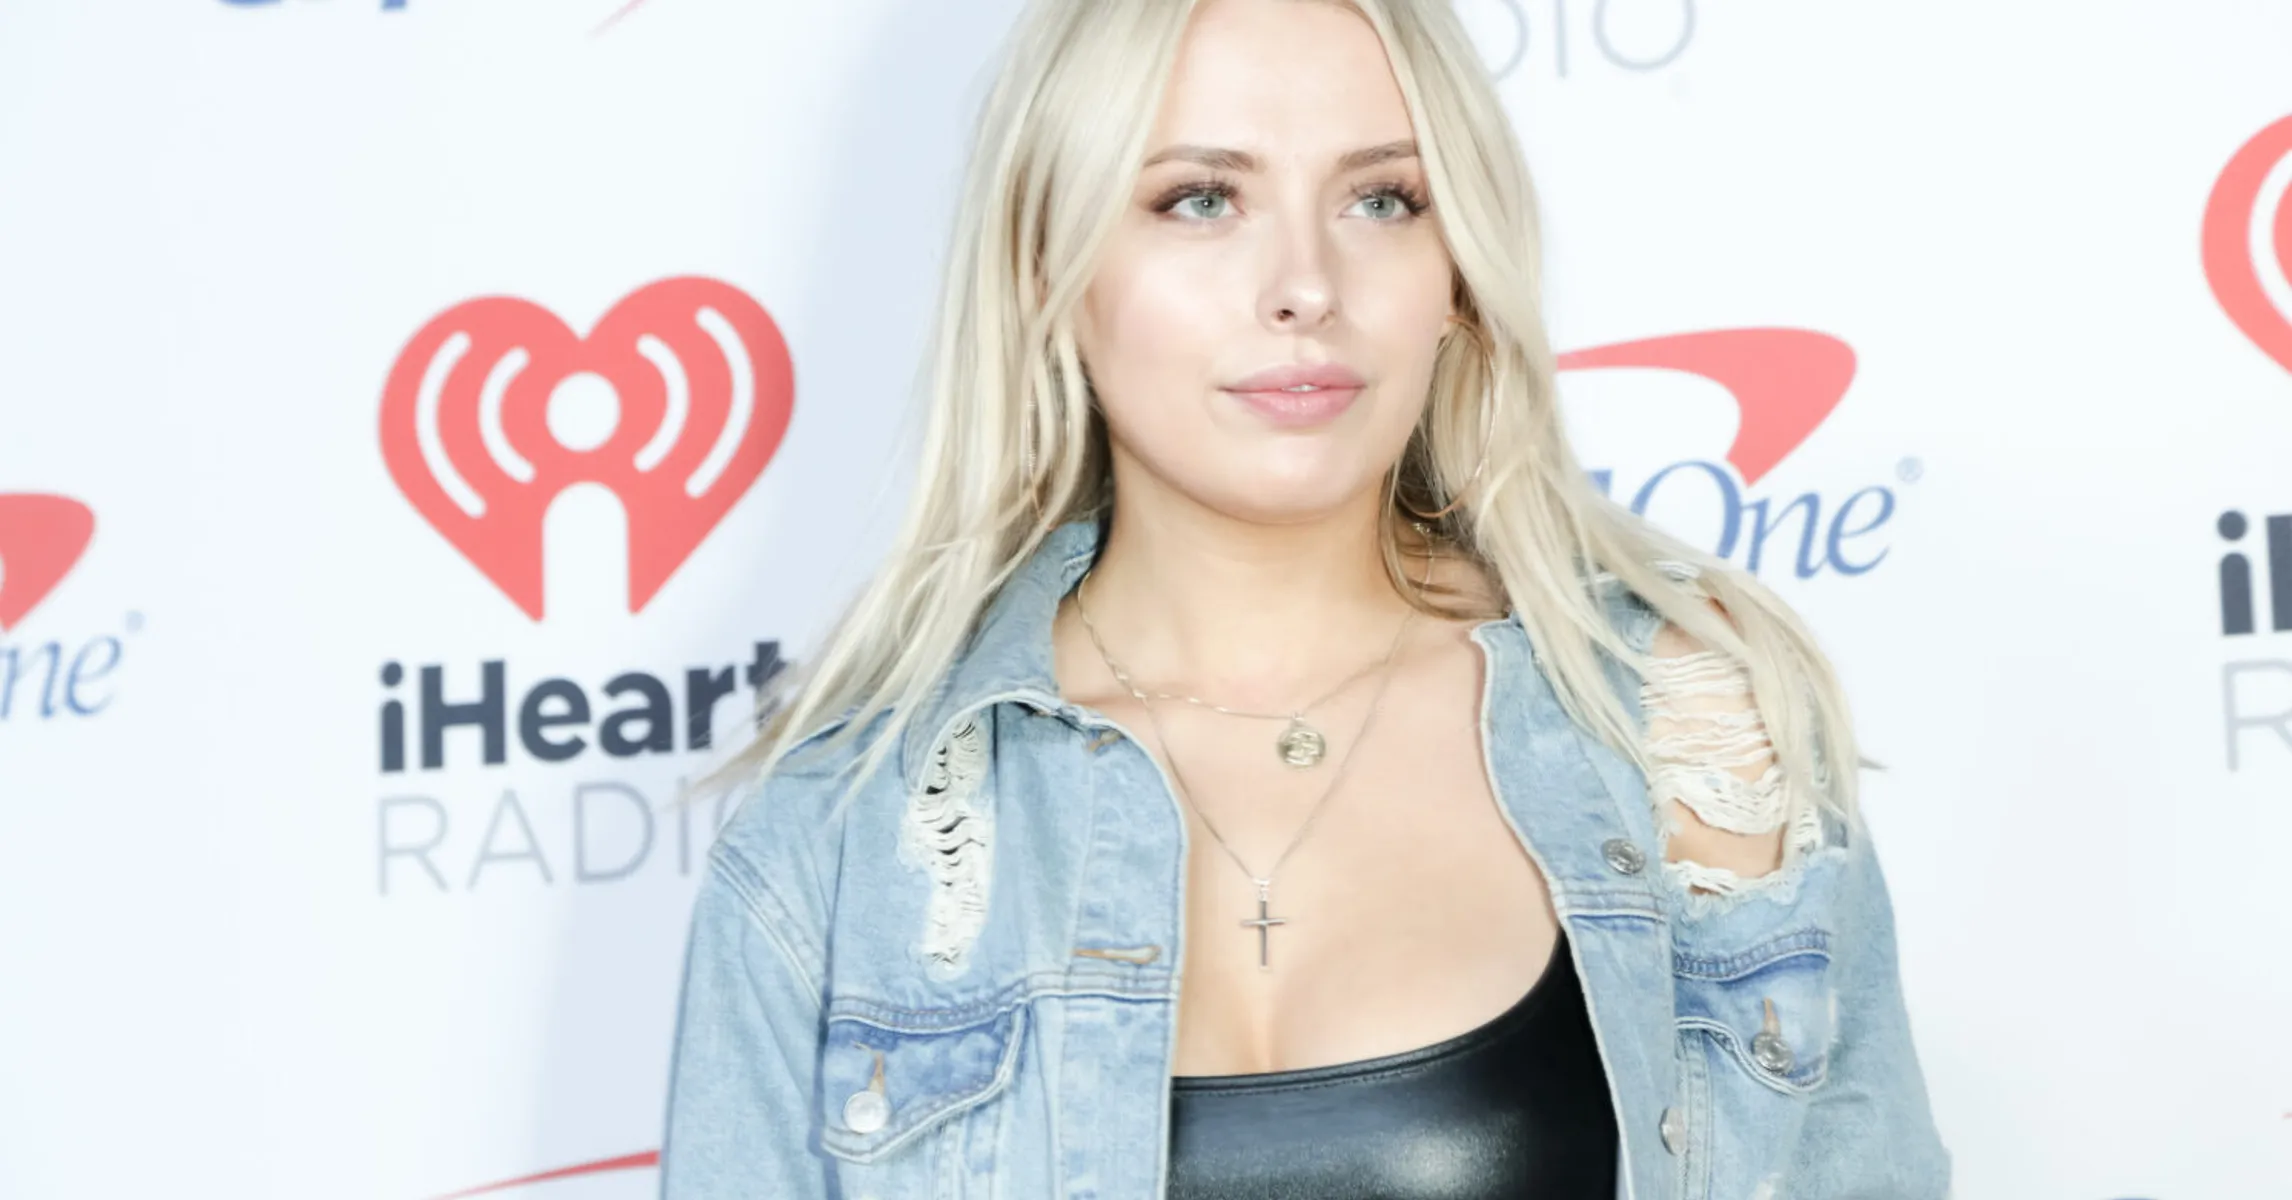 Corinna Kopf Earnings: How Much Does She Make On OnlyFans?